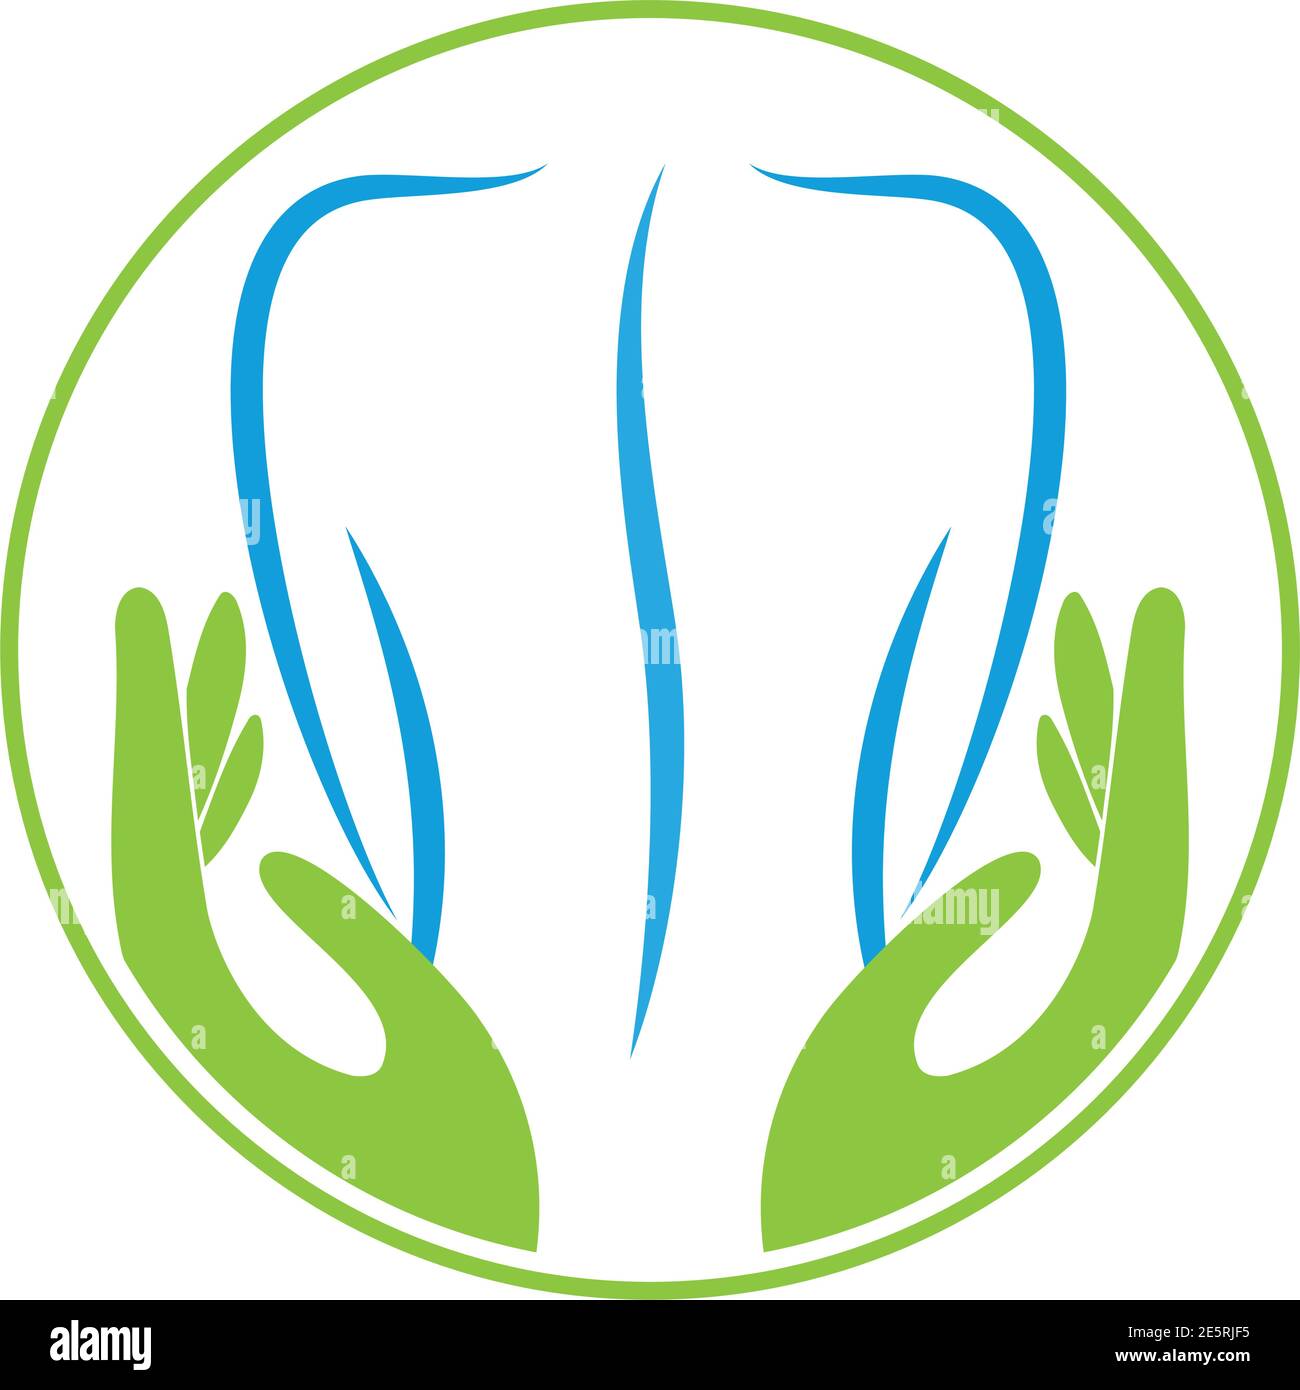 Person, Two Hands, Orthopedics, Chiropractor, Logo Stock Vector